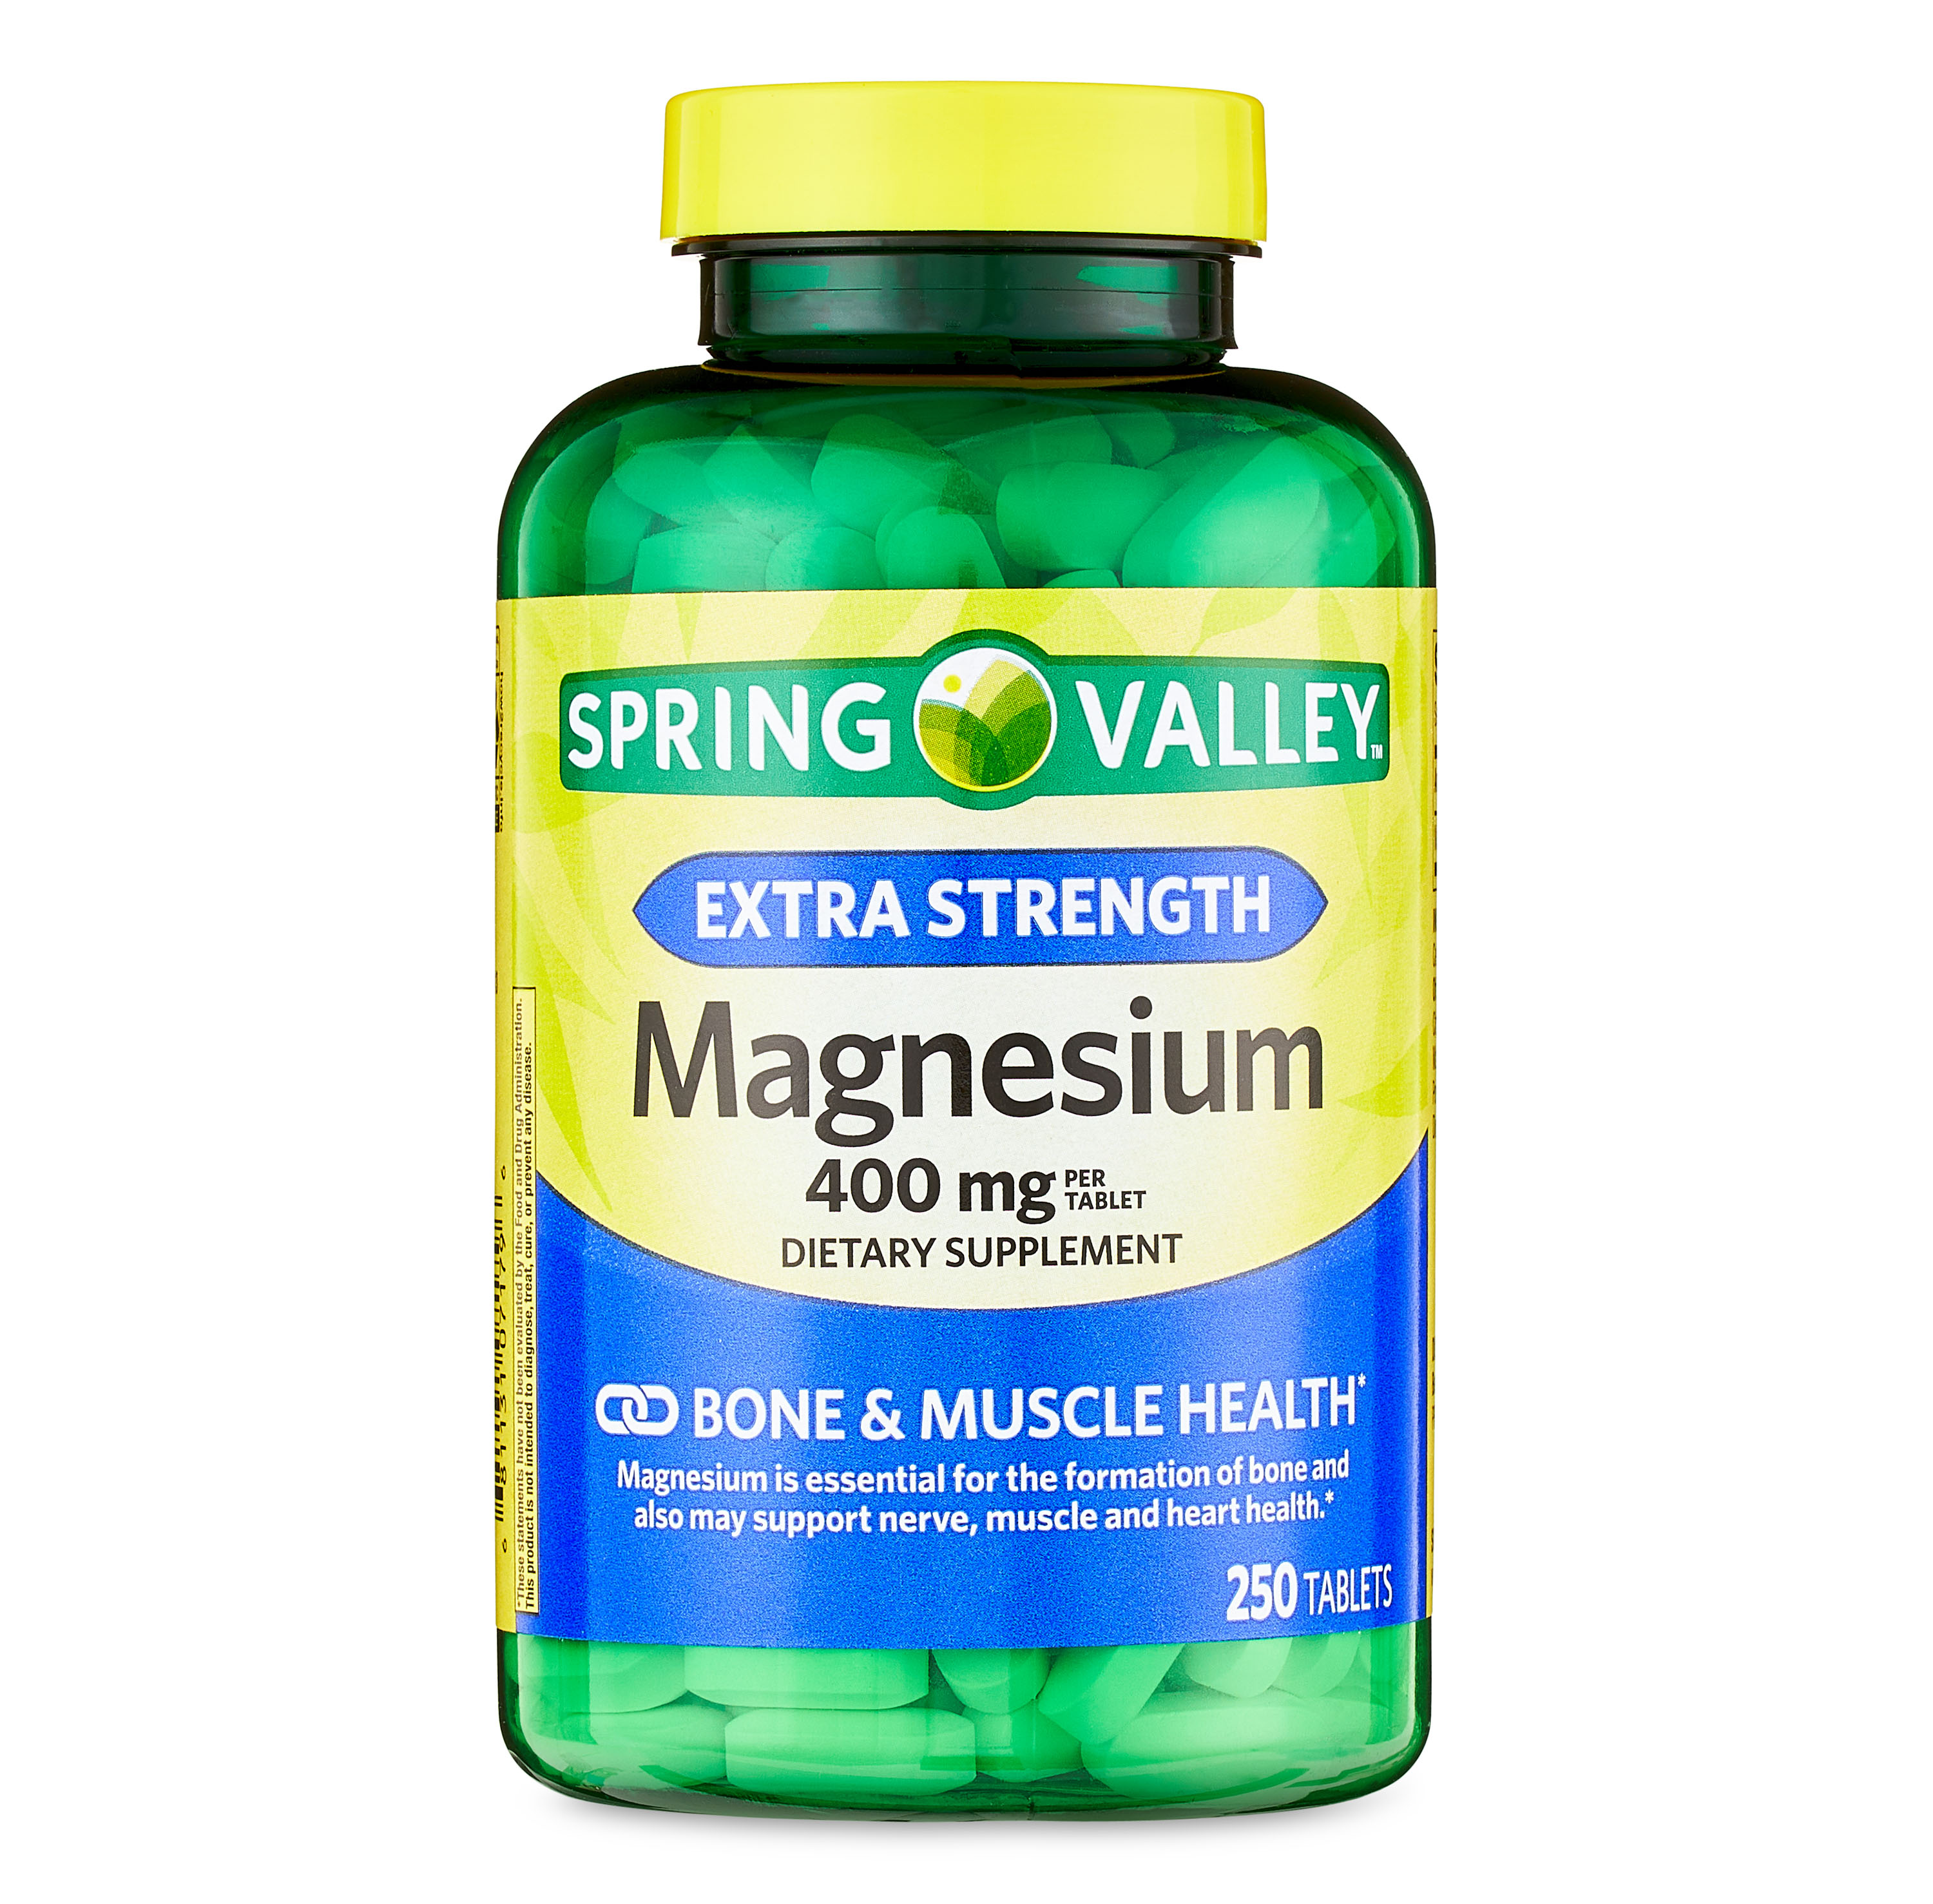 Spring Valley Magnesium Bone & Muscle Health Dietary Supplement Tablets, 400 mg, 250 Count - image 1 of 10